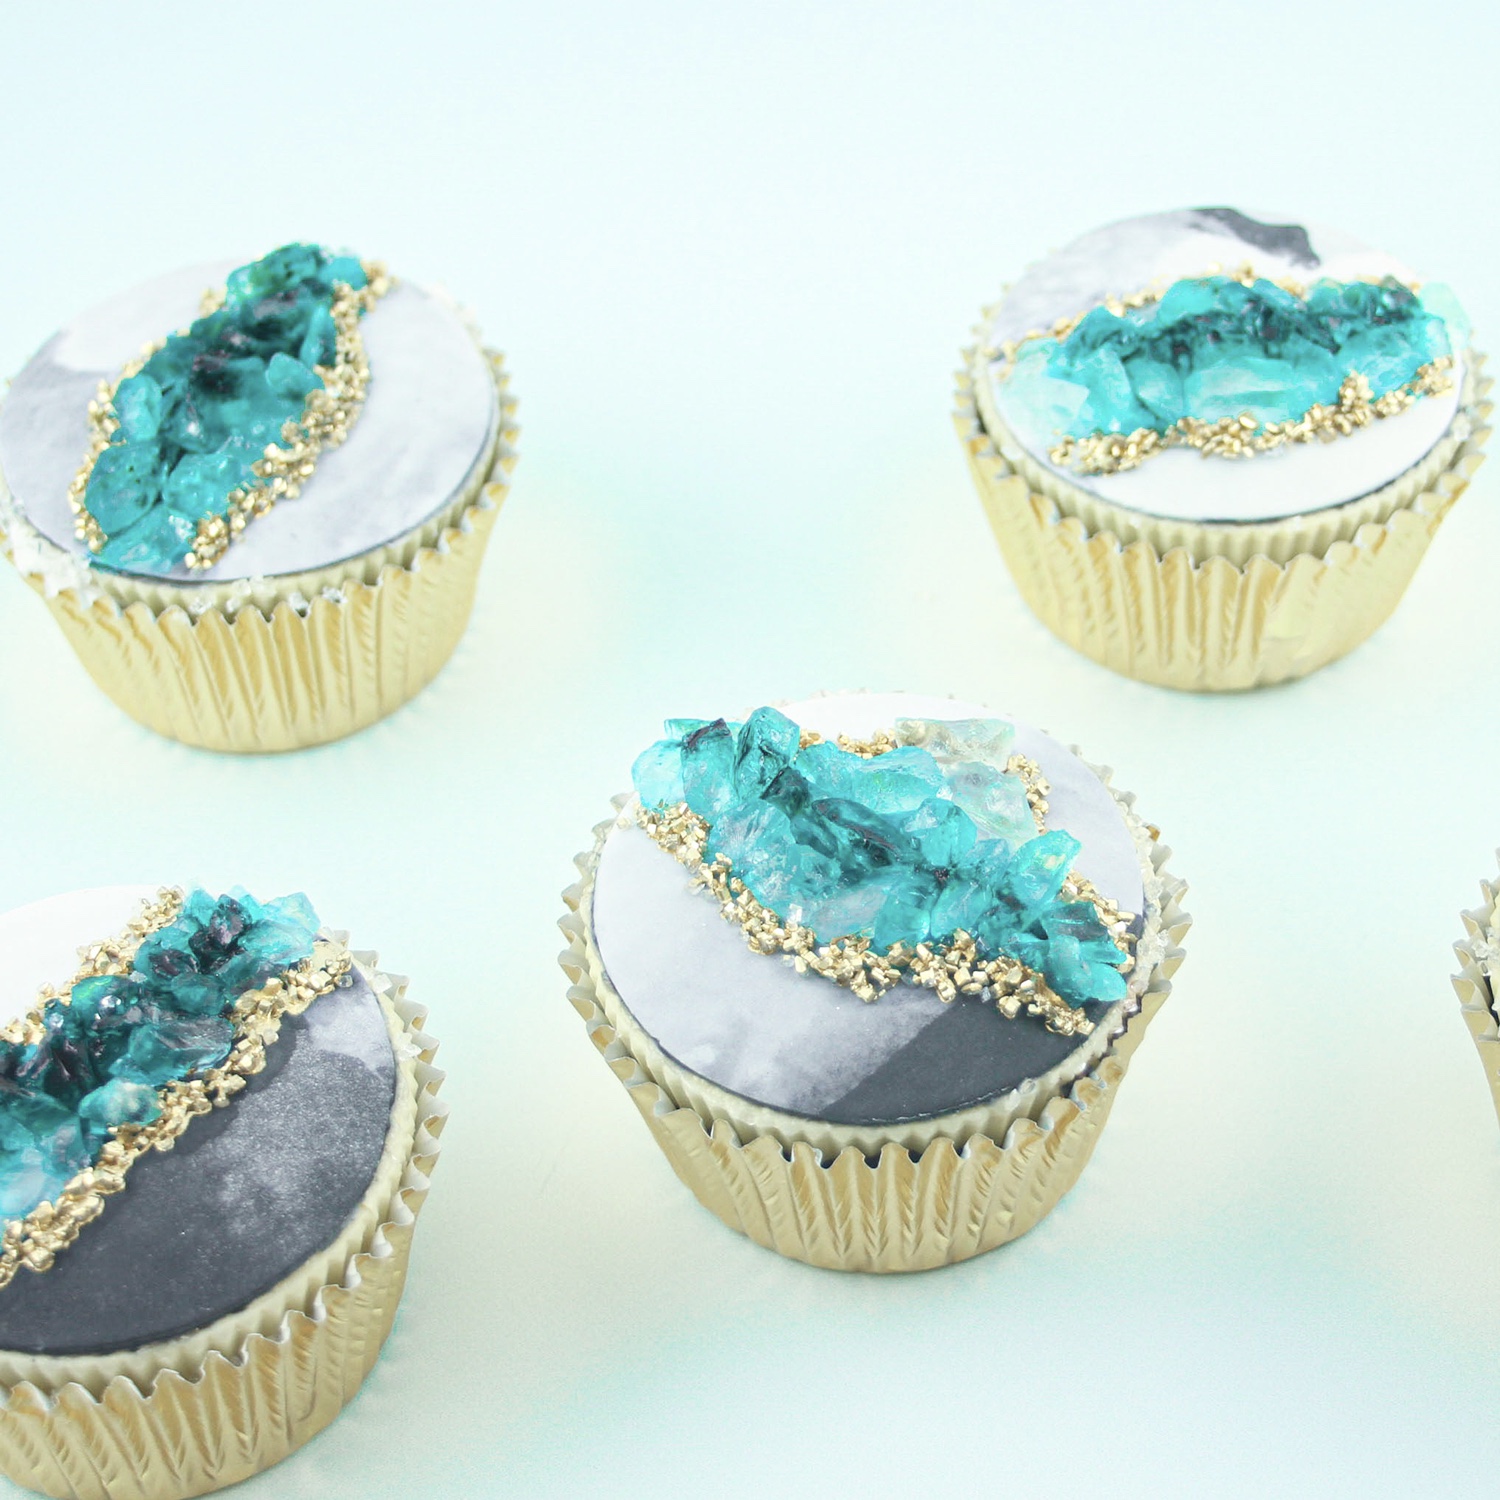 Marble fondant topped cupcake with rock candy geode effect